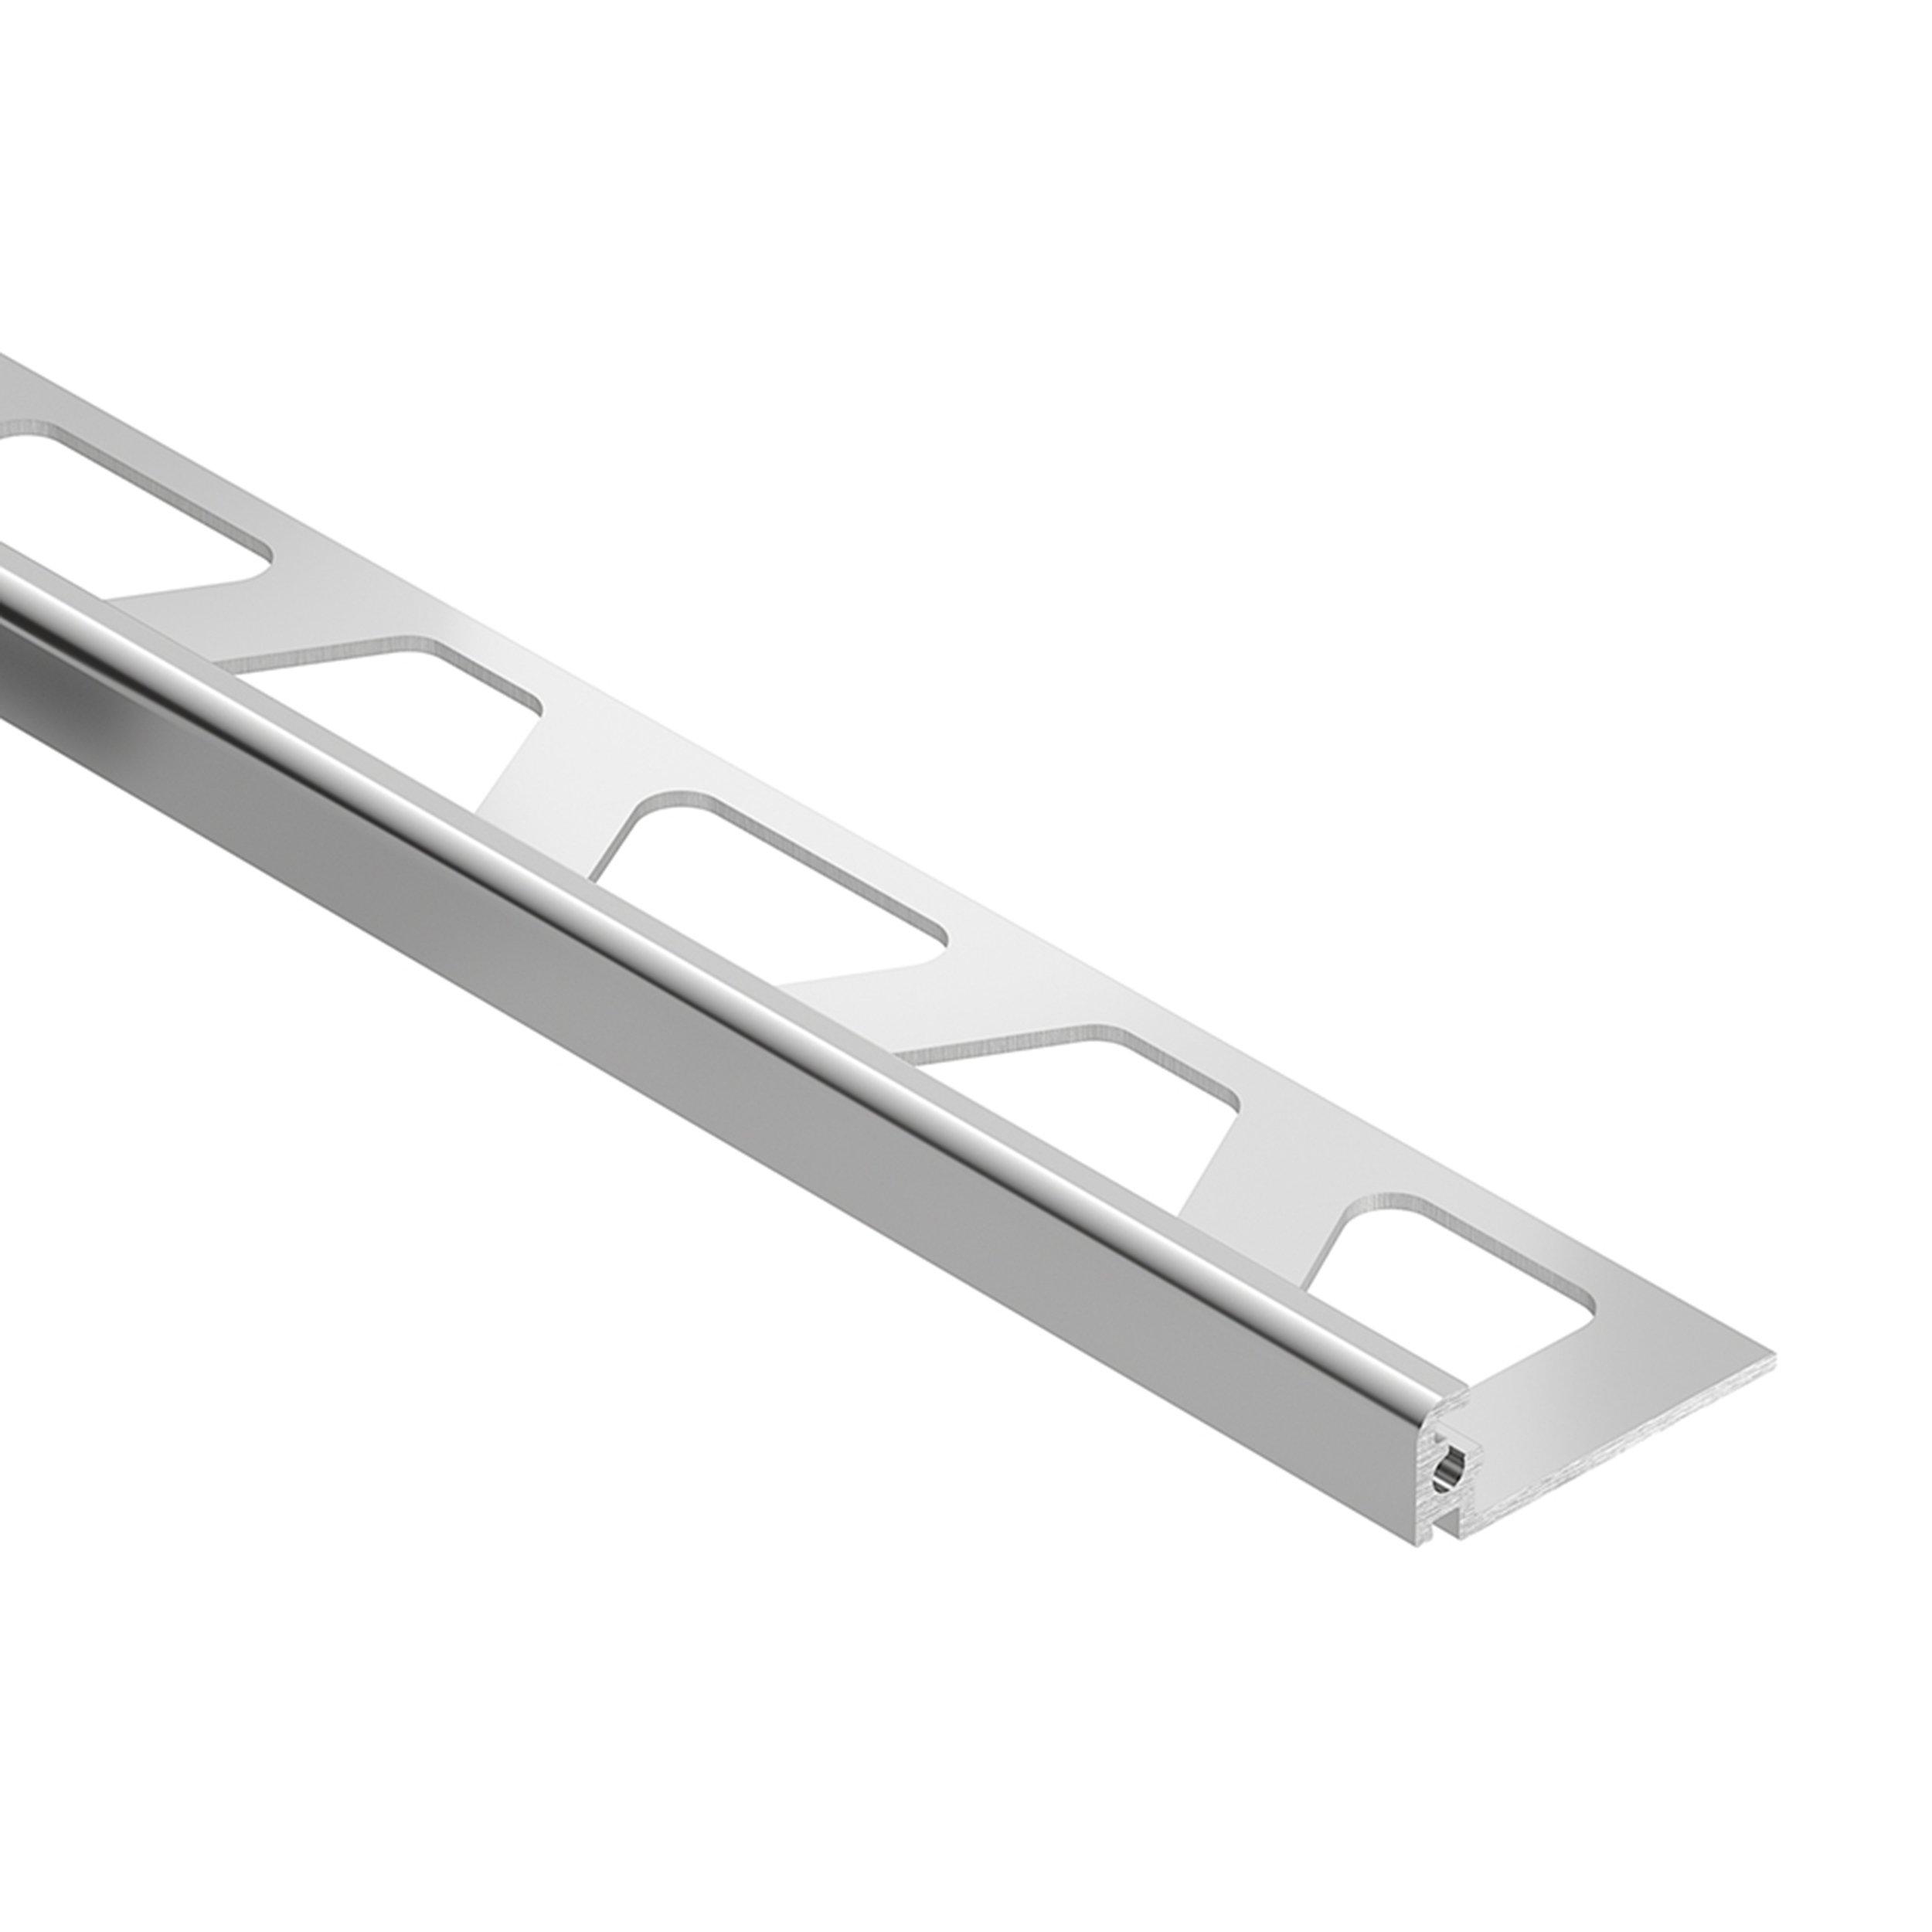 Schluter Jolly Edge Trim 1/4in. Anodized Aluminum Polished Chrome